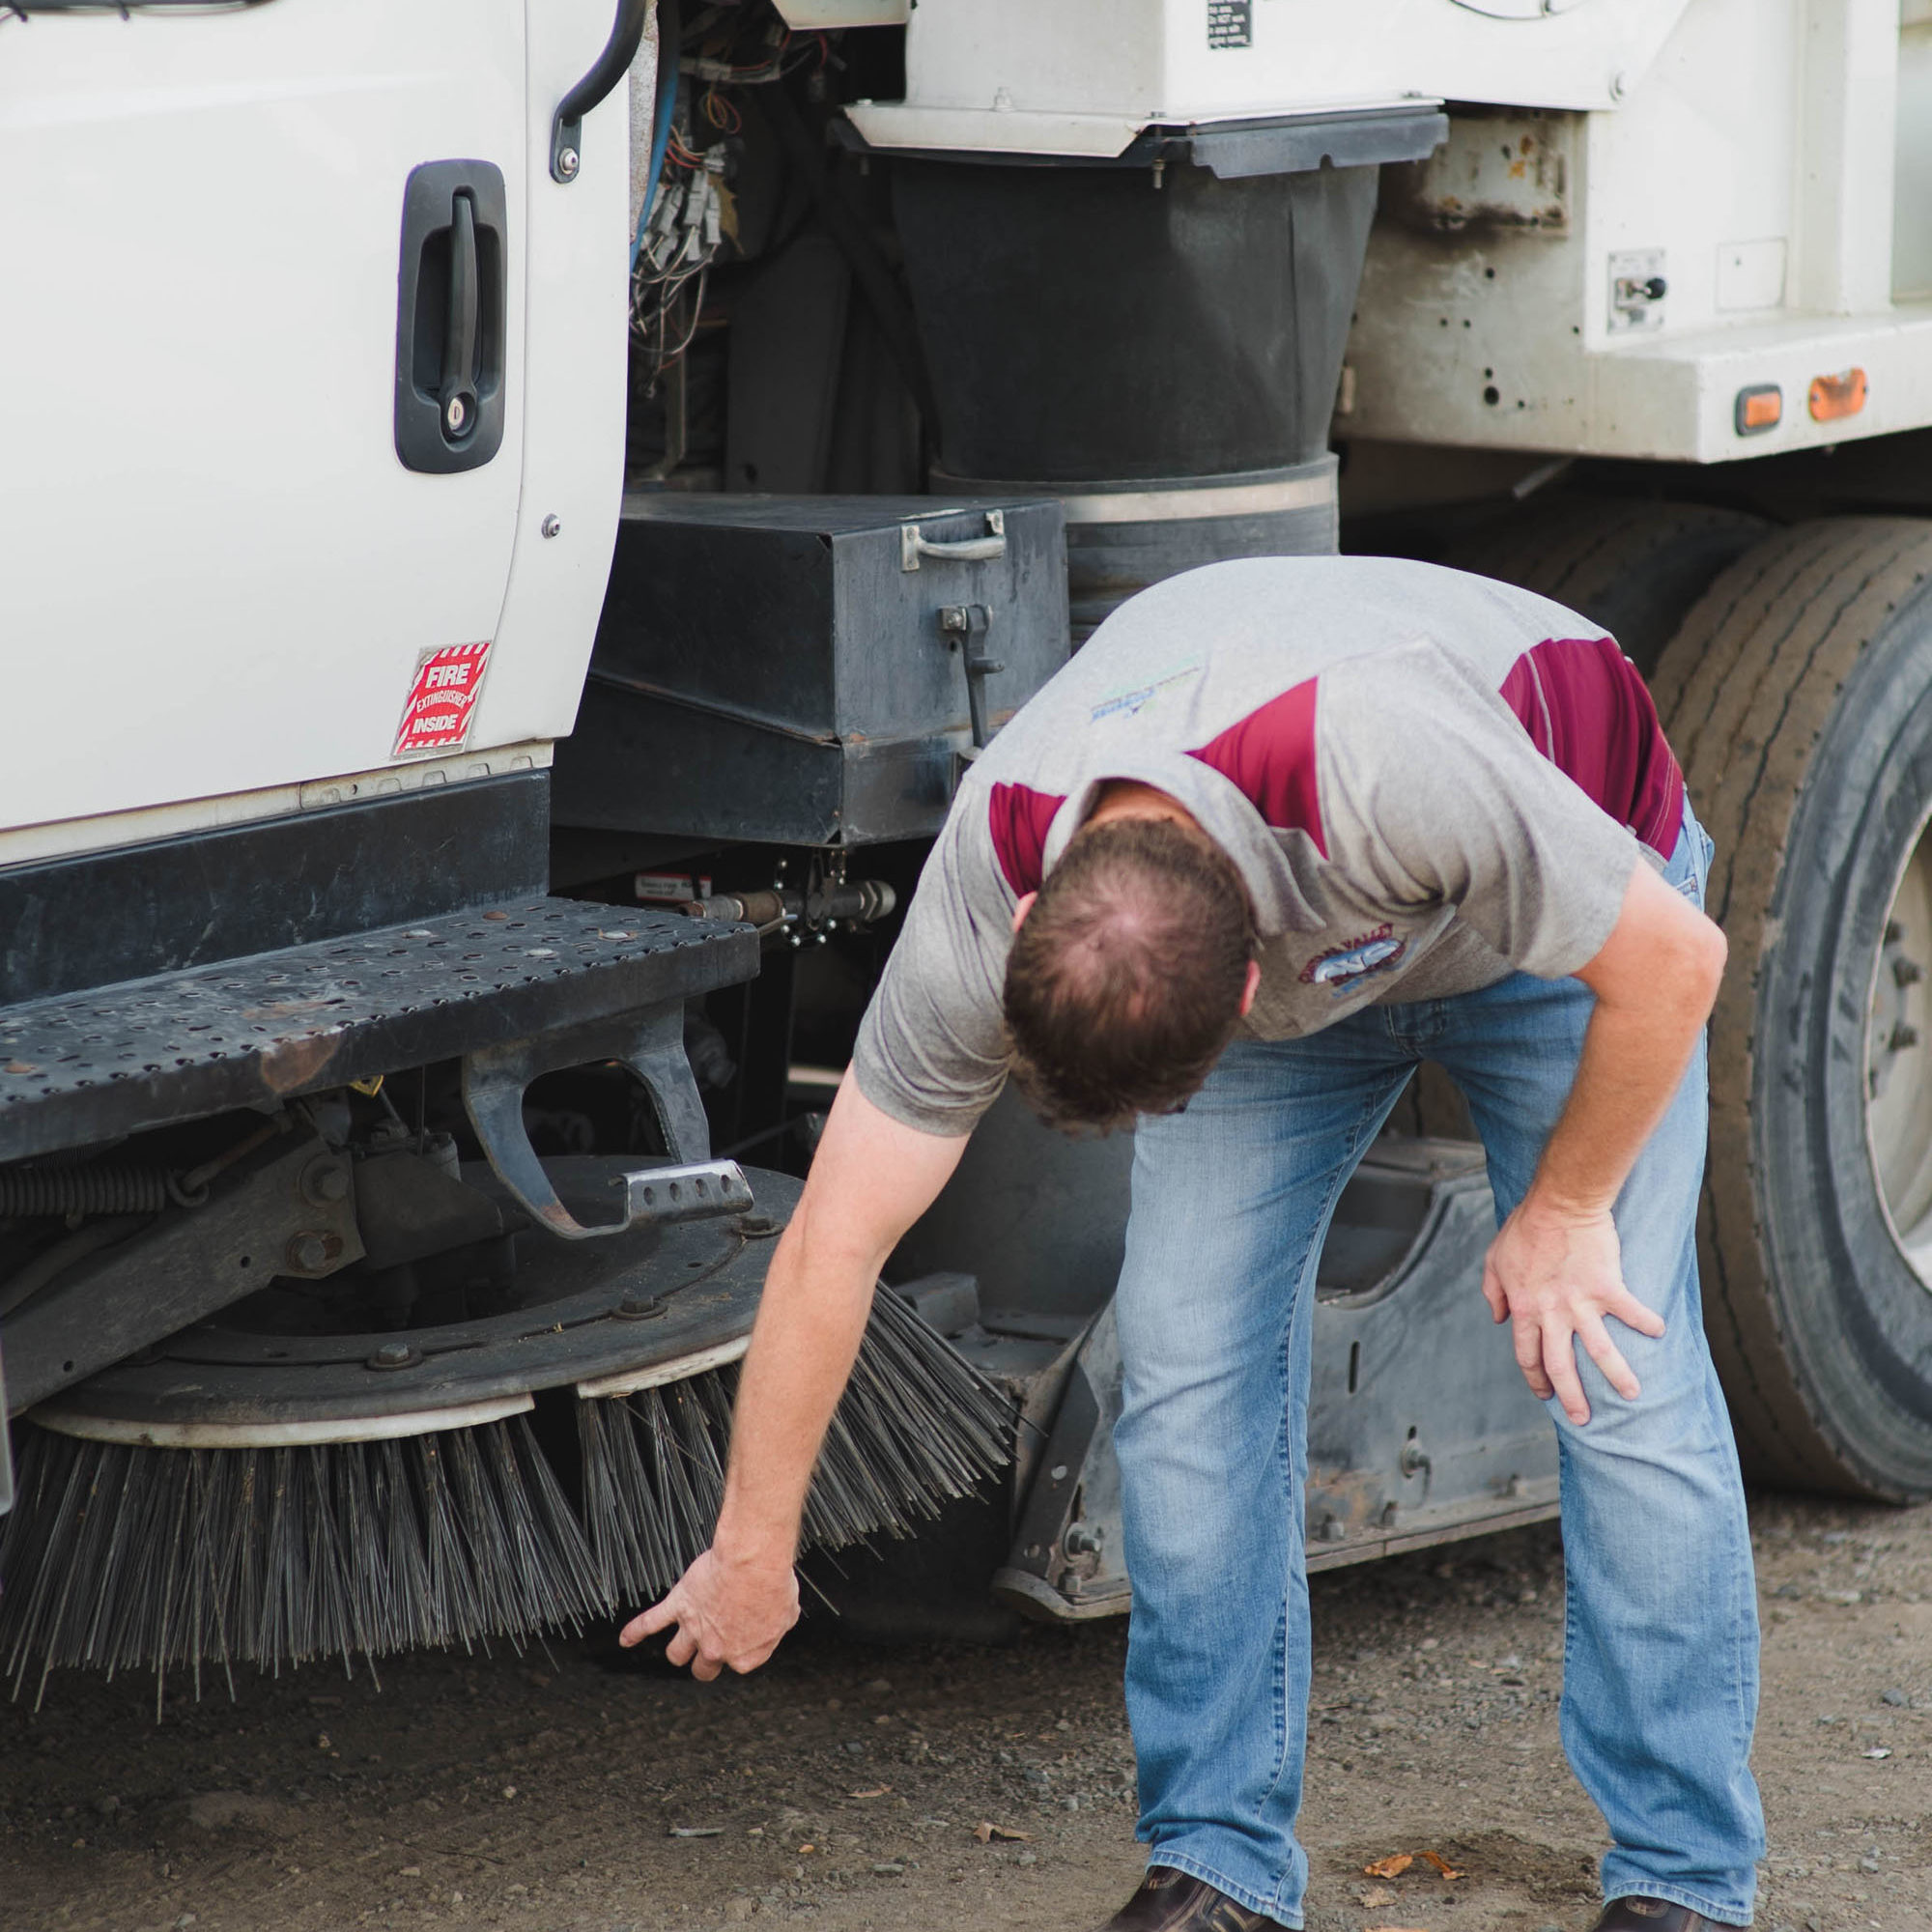 Image: A CVS employee adjusting a sweeper. Learn more about industrial sweeping.